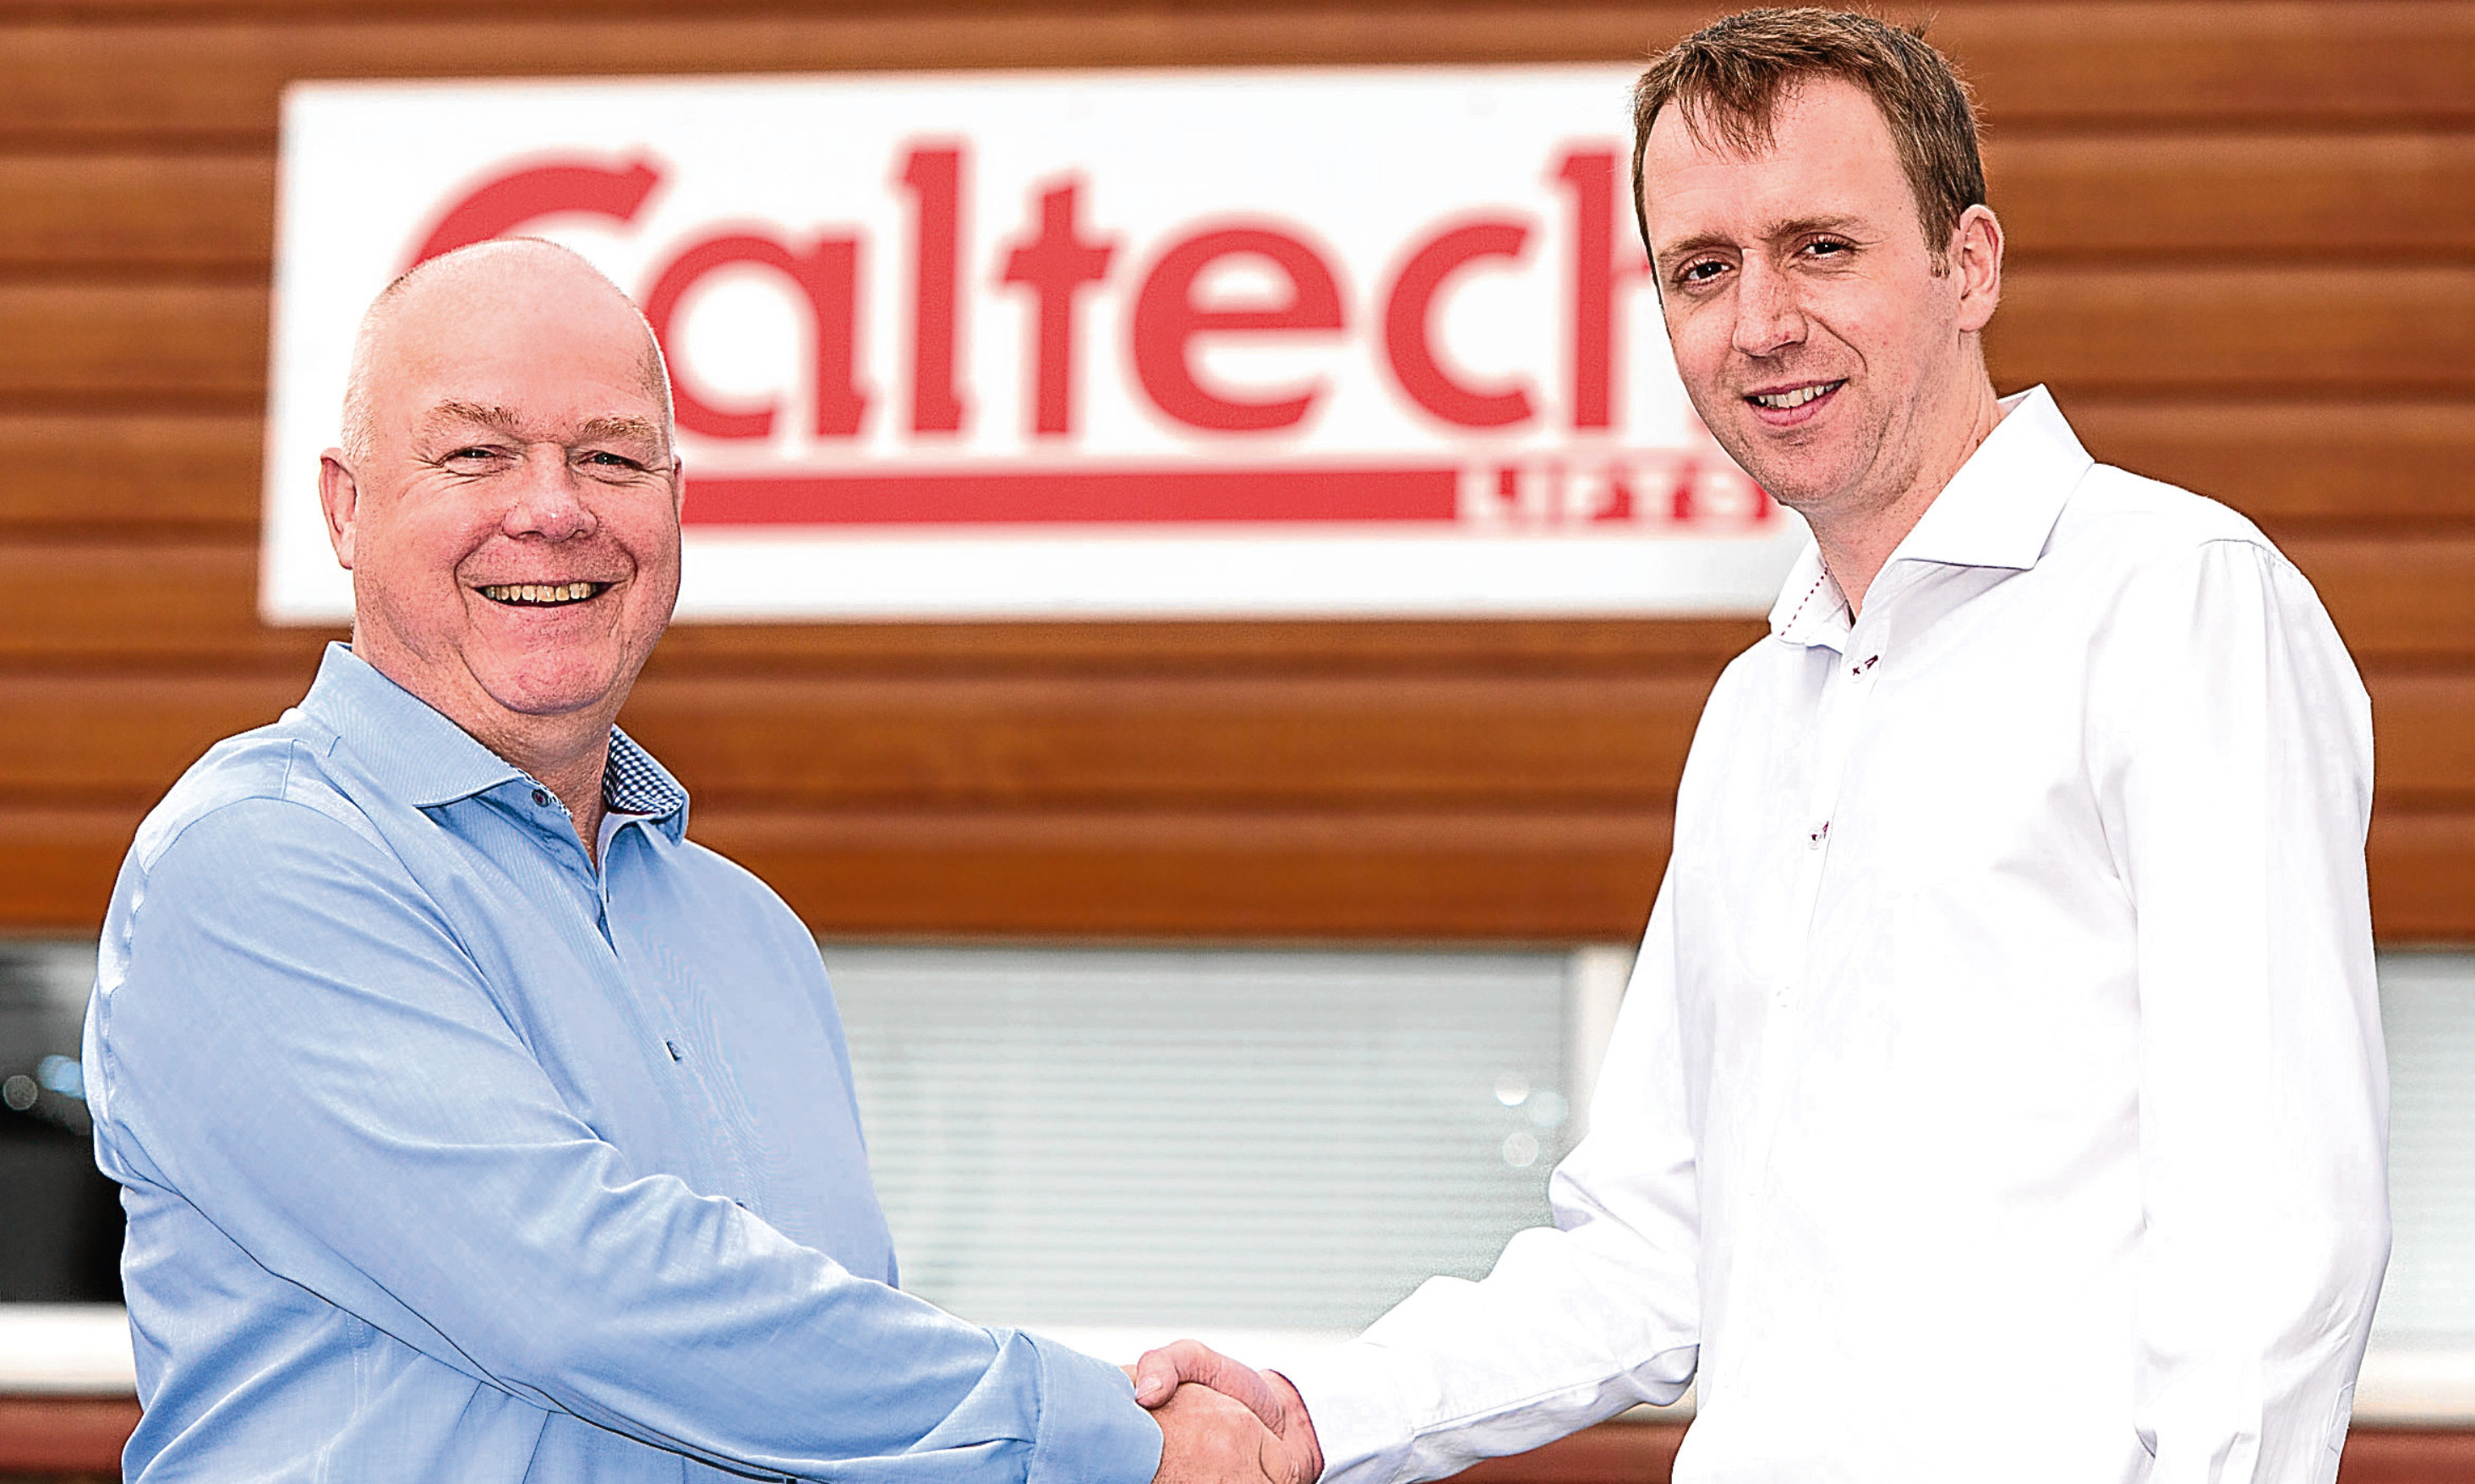 Managing Director Andrew Renwick (right) welcomes Scott Carnegie to the board of Caltech Lifts.